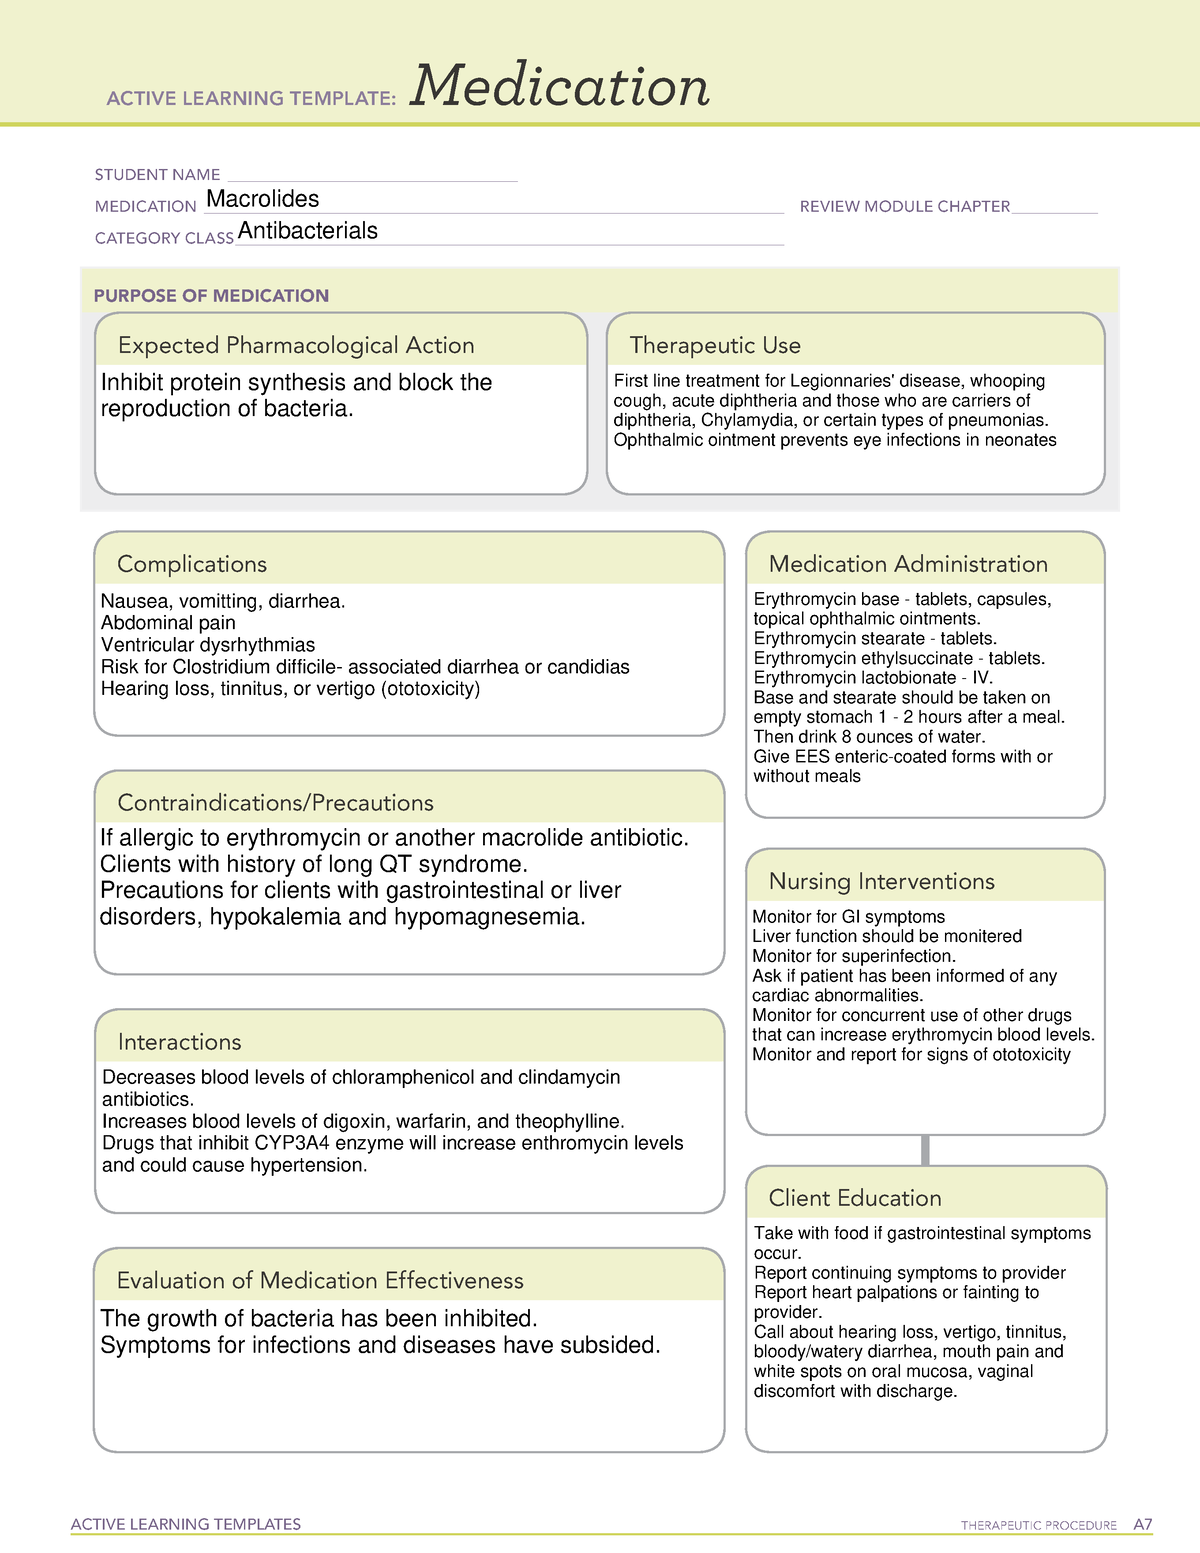 macrolides-drug-template-done-during-the-semester-active-learning